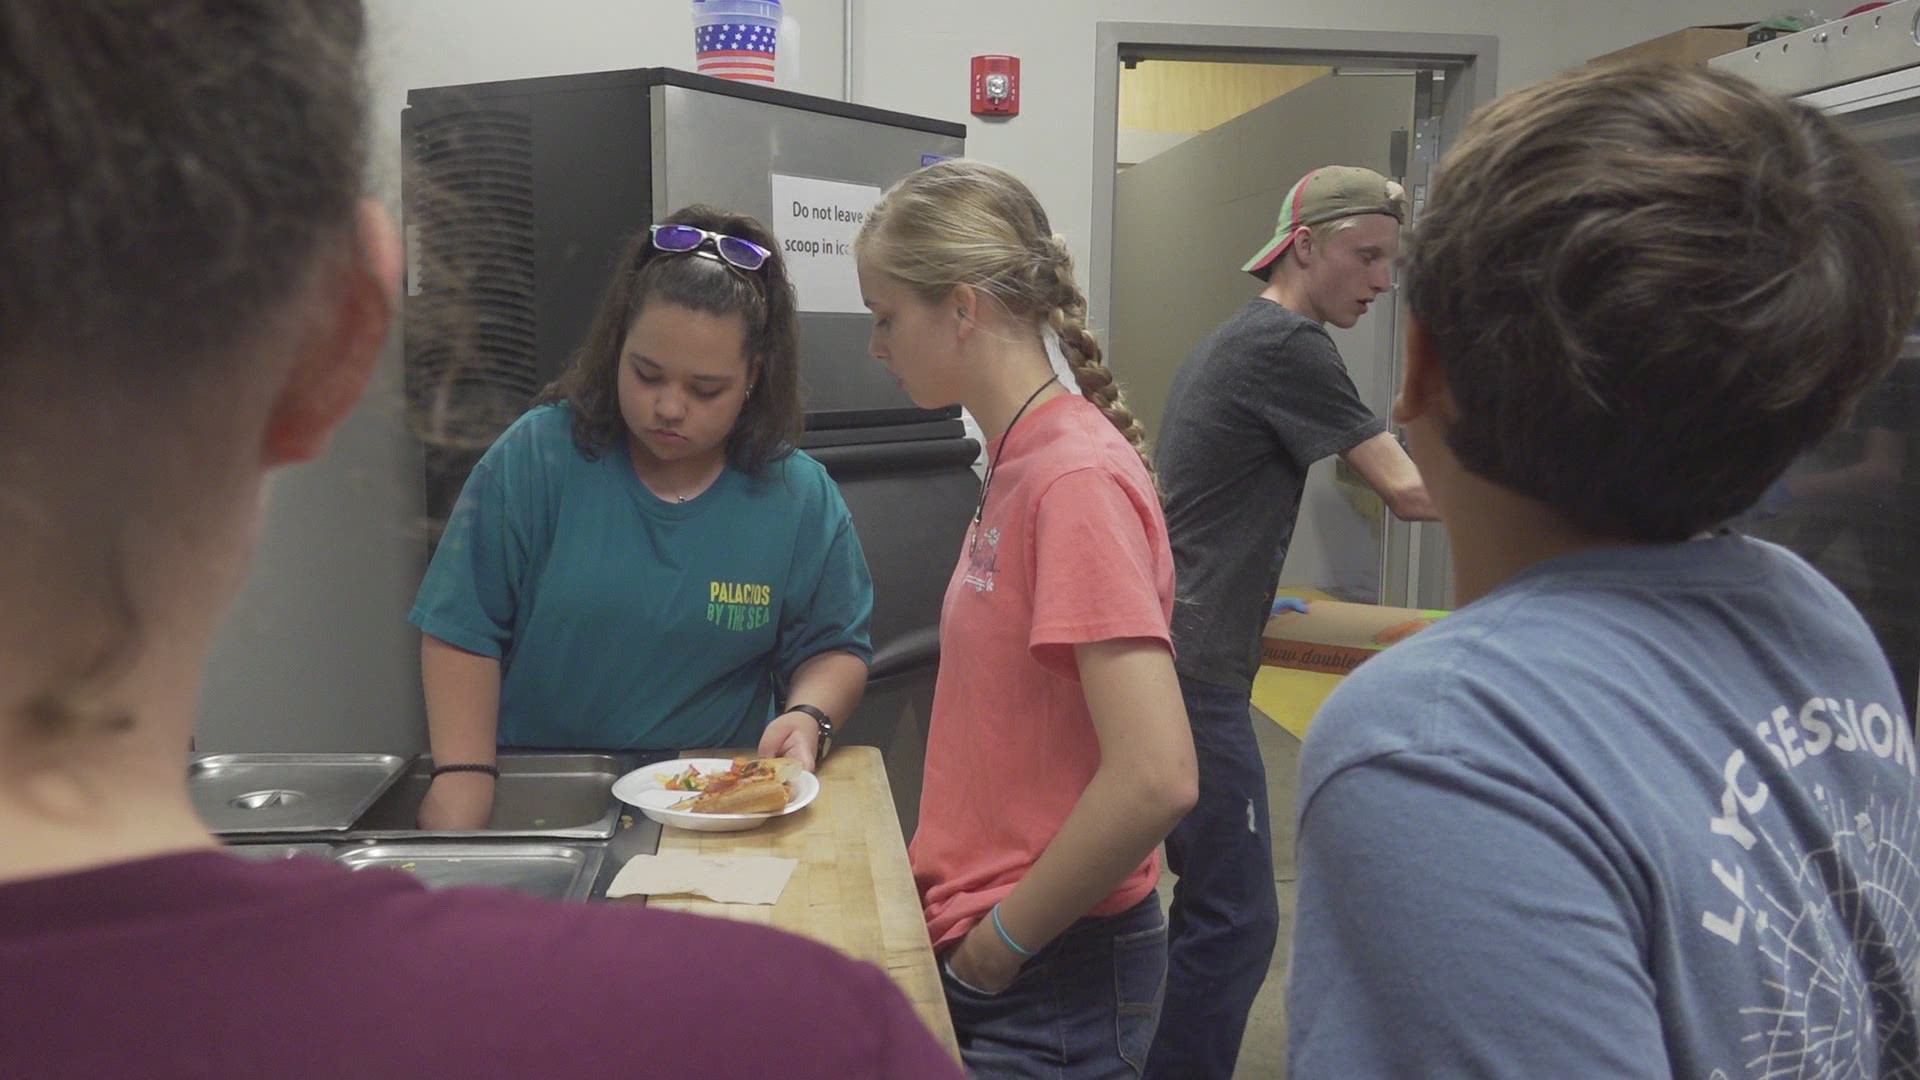 Several locations in West Texas are opening their door, for students to come in and have a free lunch.